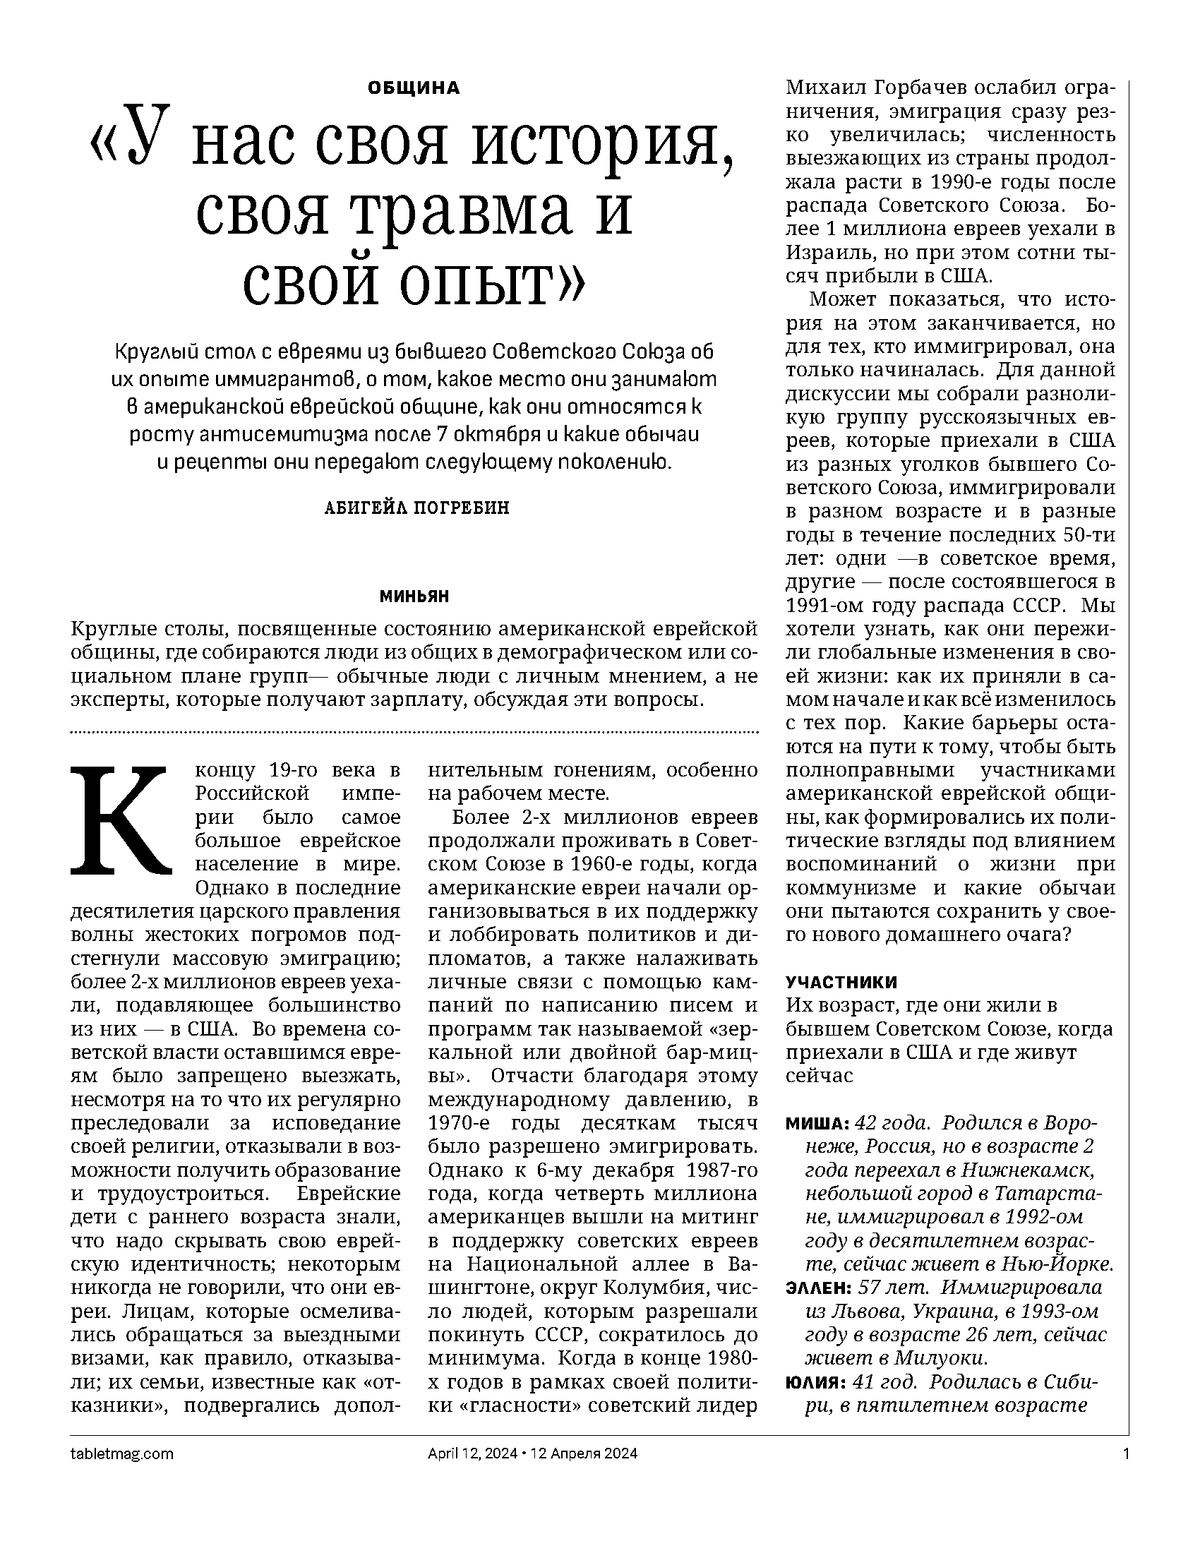 Download a Russian-language translation of this article in printable PDF format